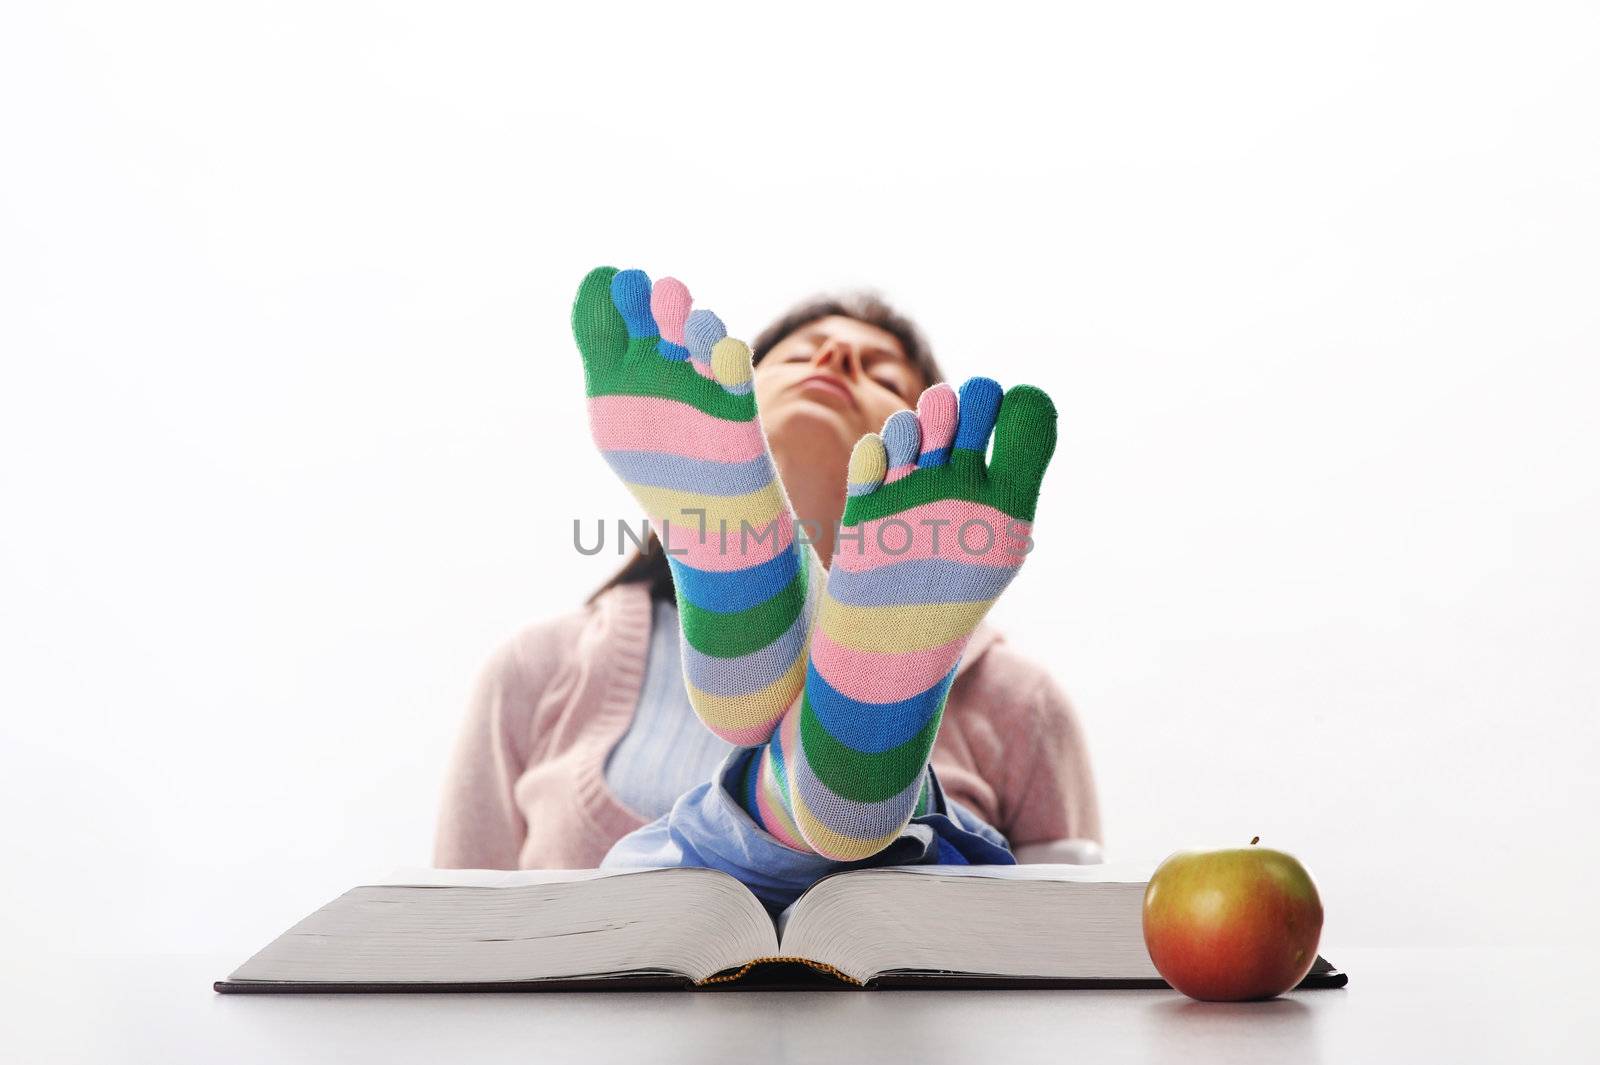 Tired of studies,  student relaxing  with his feet up on his des by stokkete